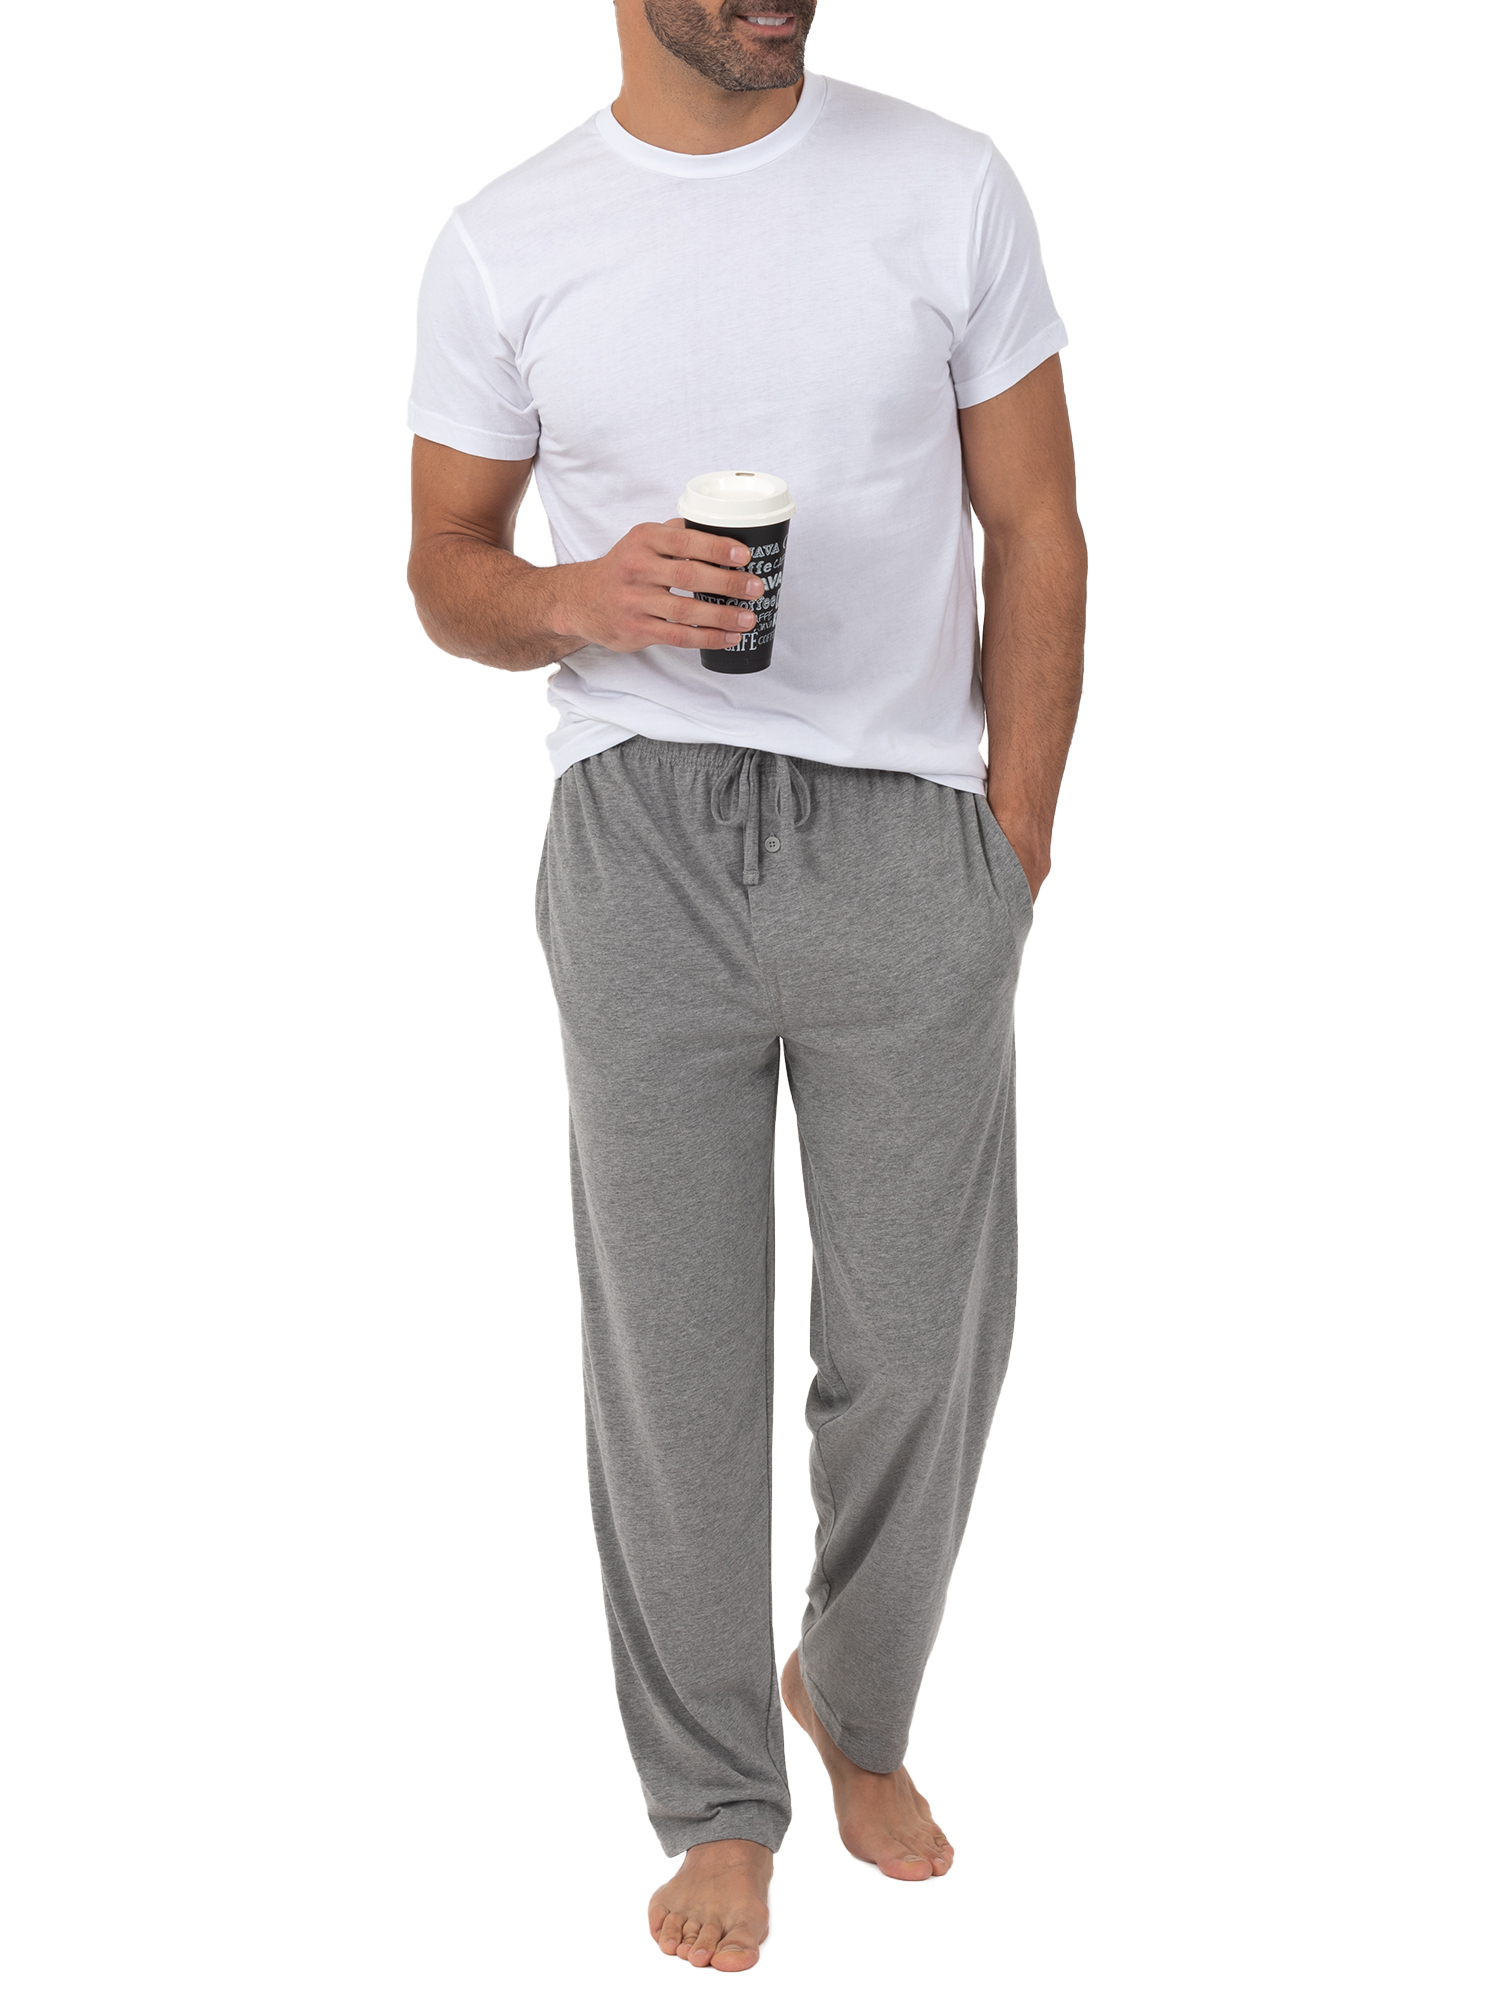 Fruit of the Loom Men's and Big Men's Jersey Knit Pajama Pants, Sizes S-6XL - image 8 of 9